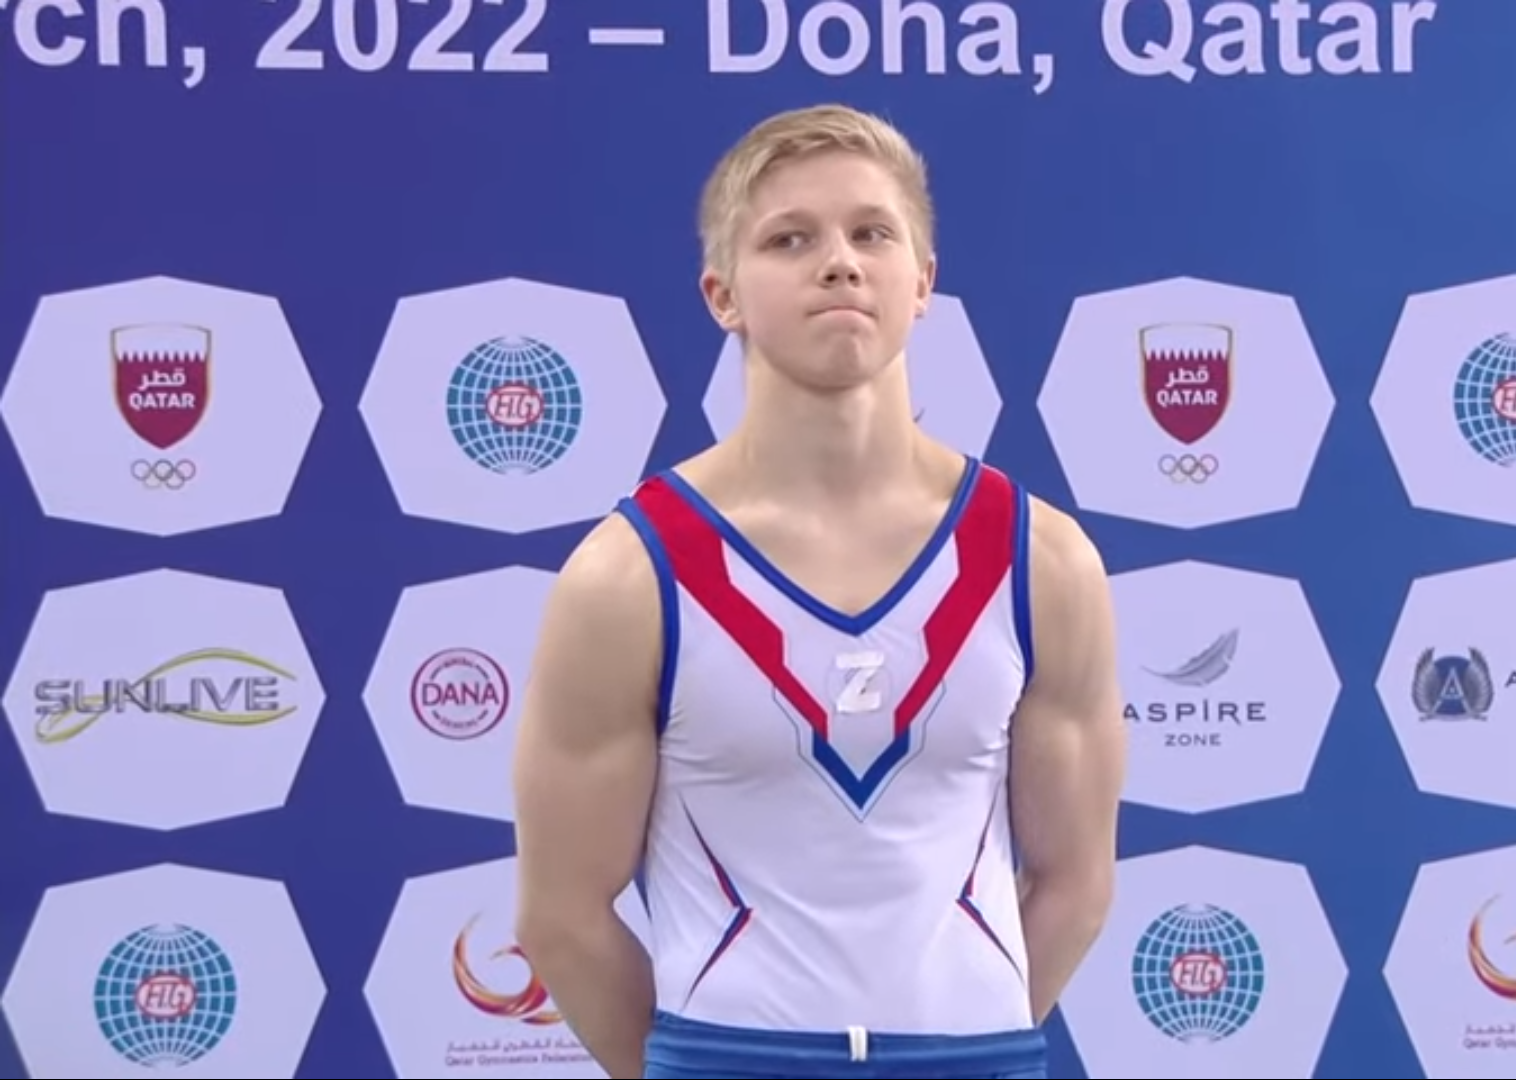 Ivan Kuliak has been banned for a year after he demonstrated his support for the Russian invasion of Ukraine during the World Cup in Doha ©YouTube